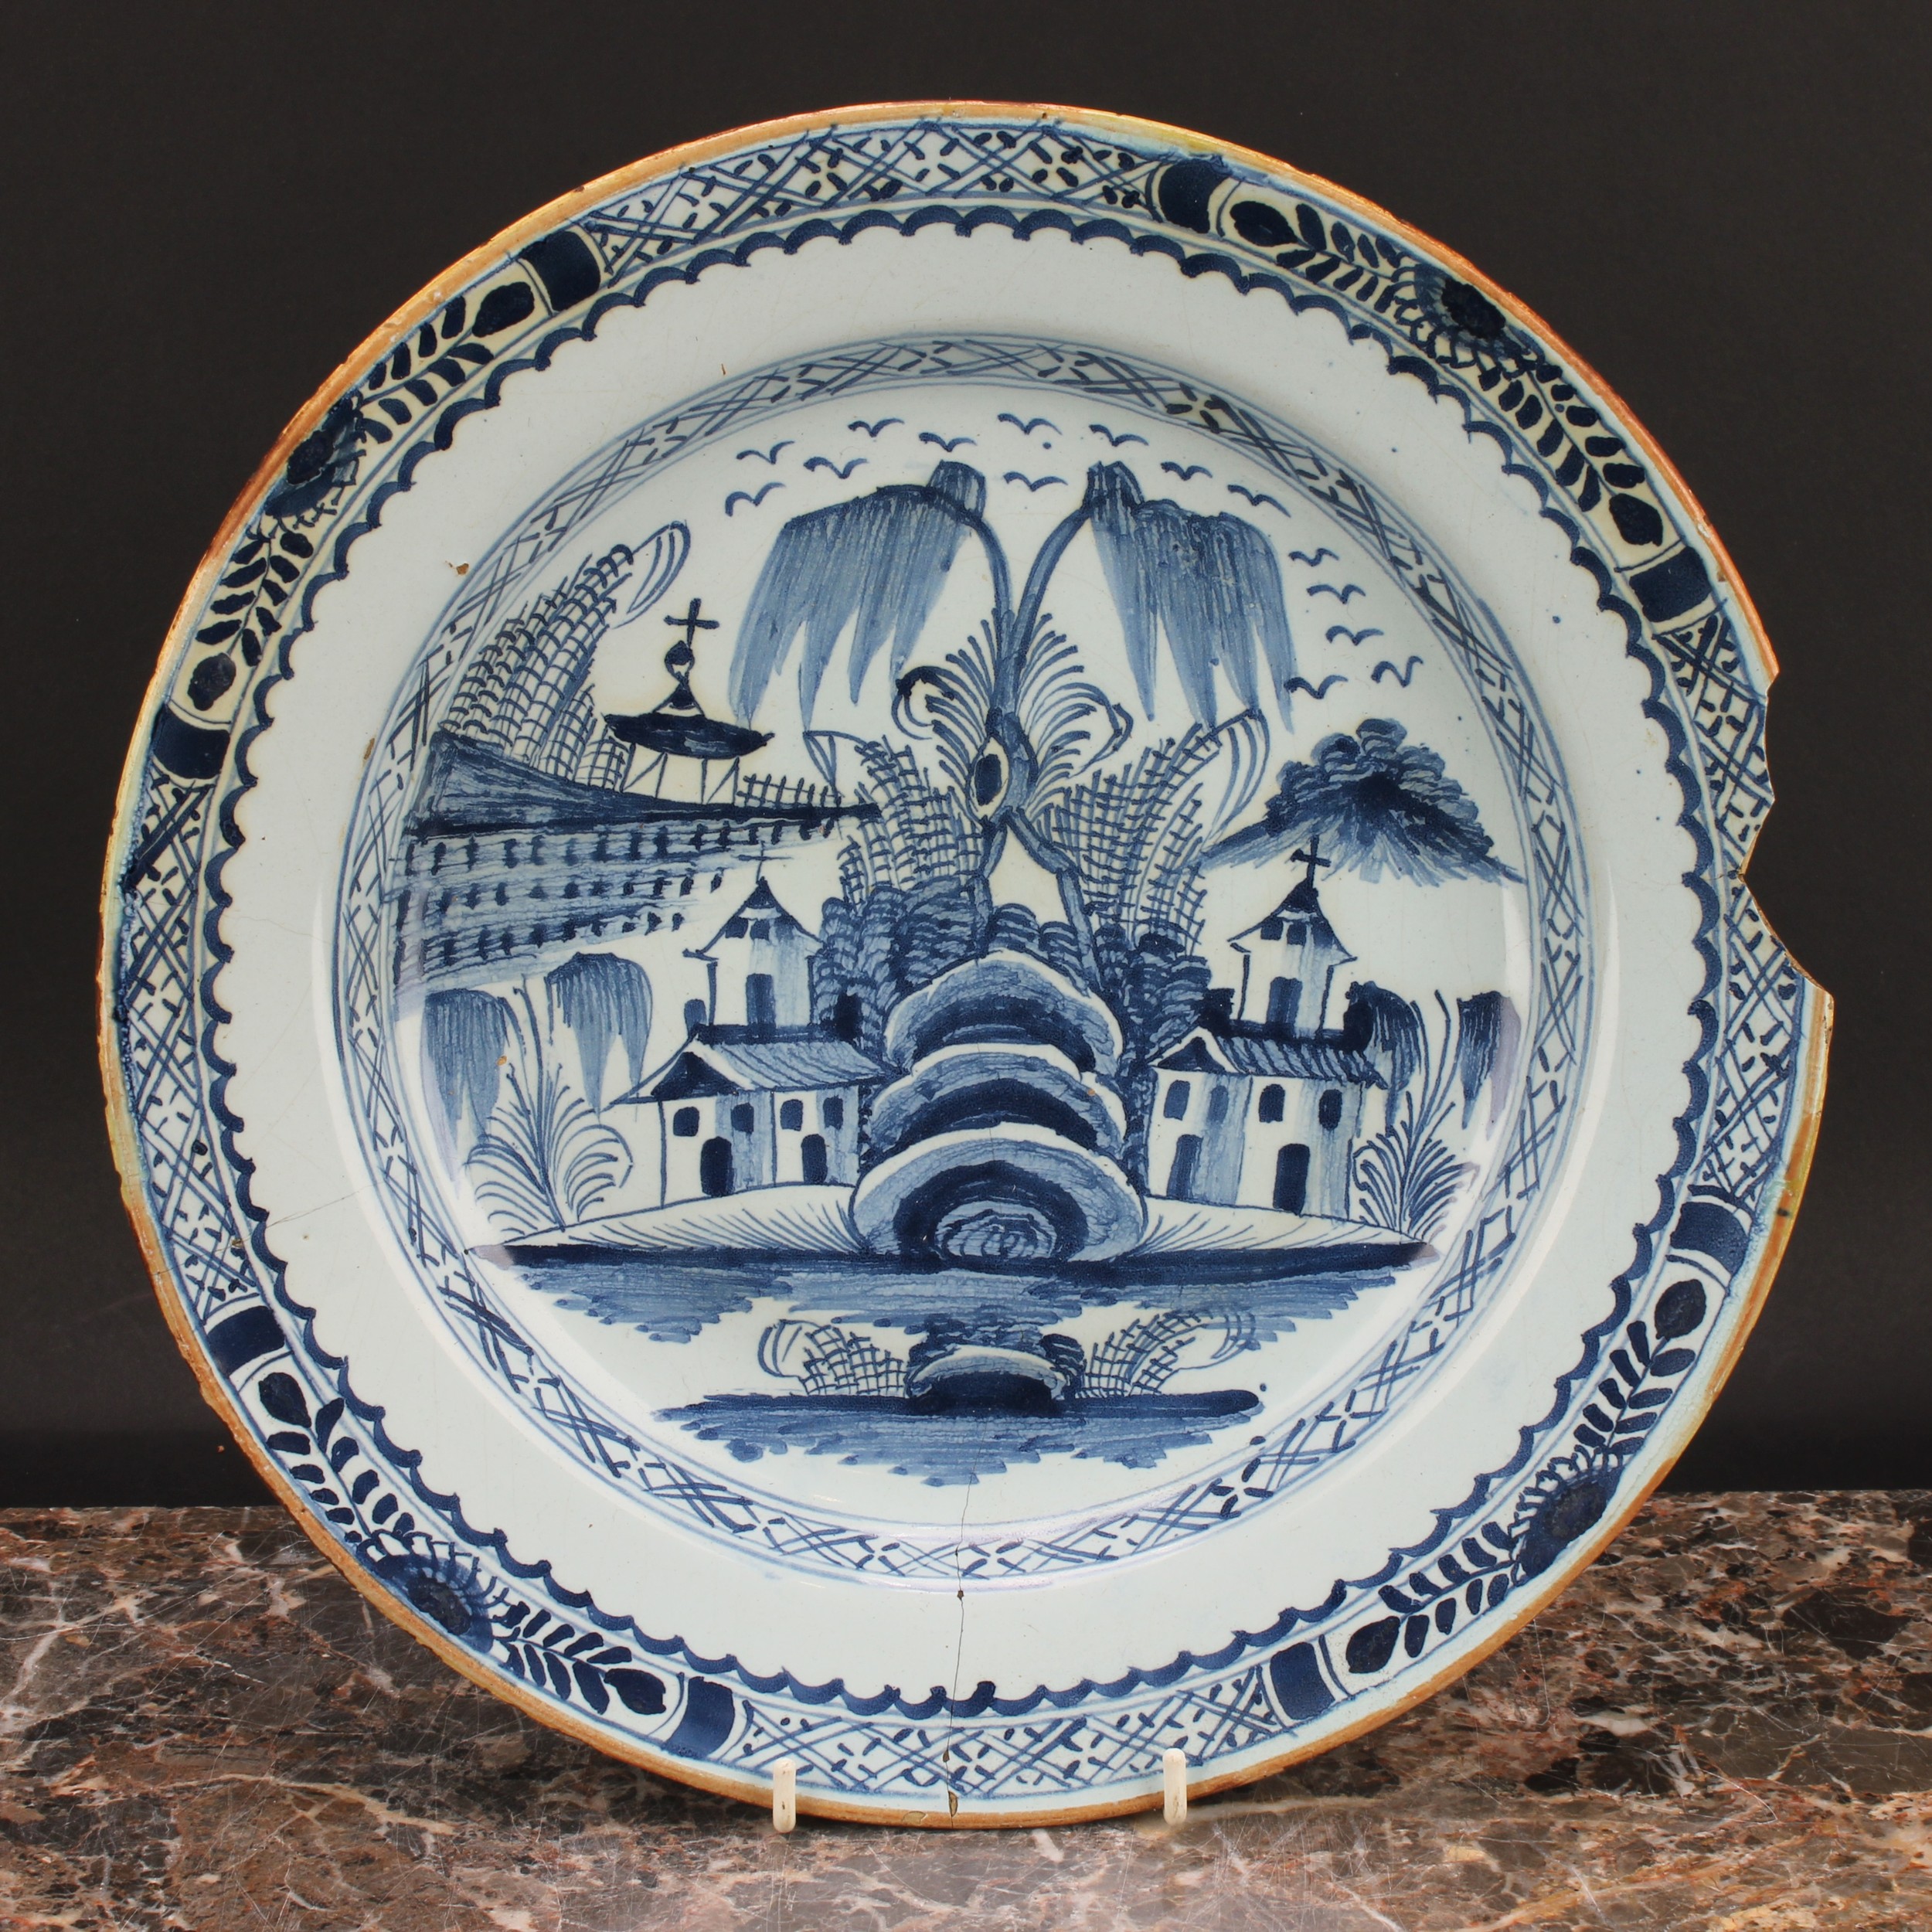 An 18th century English Delft charger, painted in underglaze blue with chinoiserie buildings, - Image 3 of 4